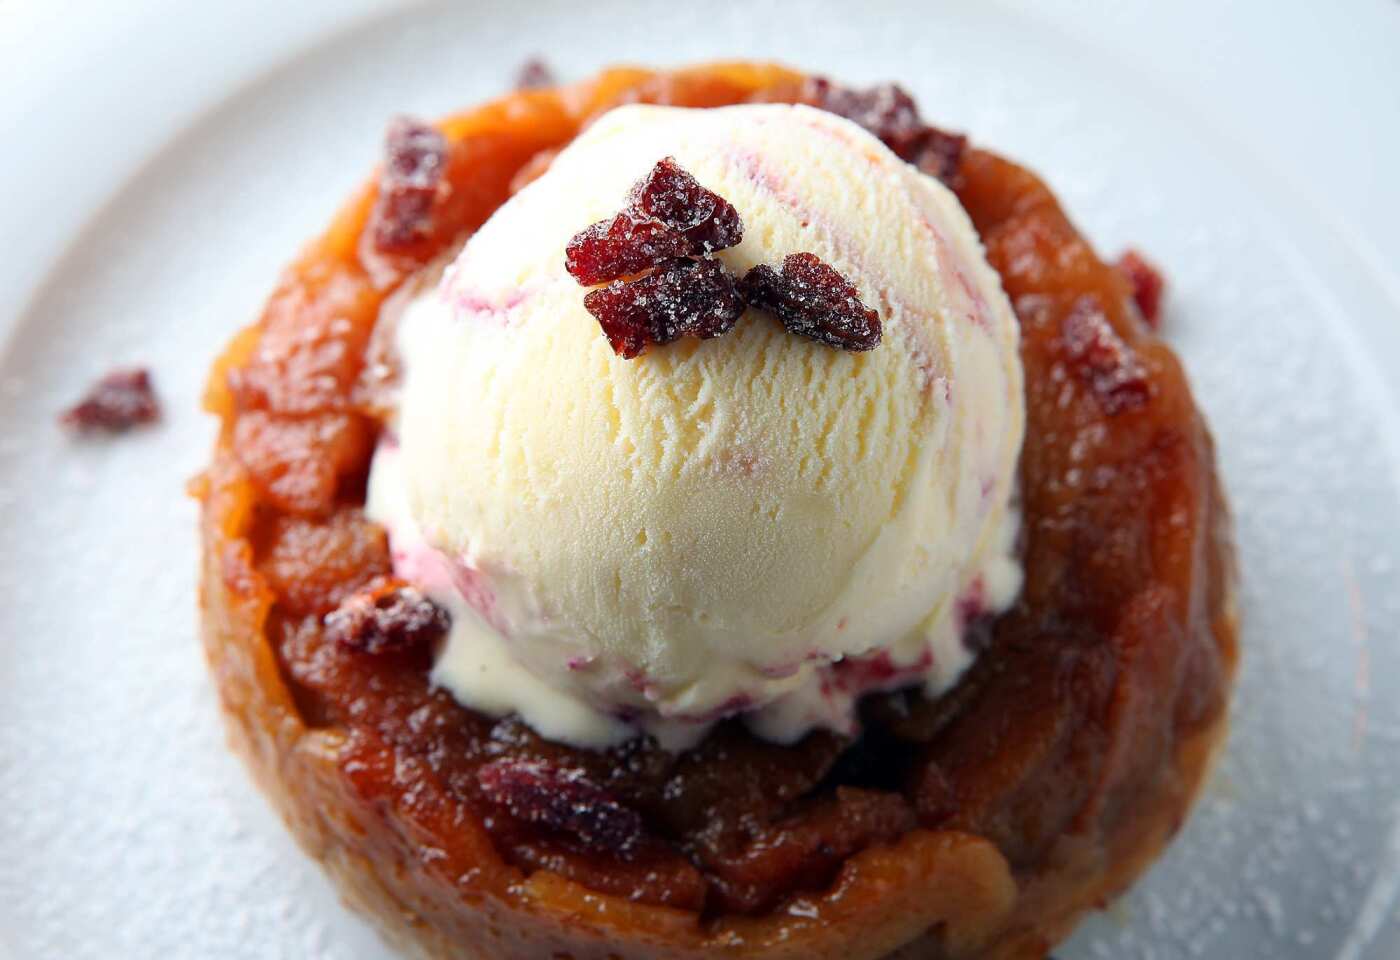 Dessert at the Water Grill in downtown Los Angeles could be the pear and dried cherry tarte tatin, topped with cherry swirl ice cream.